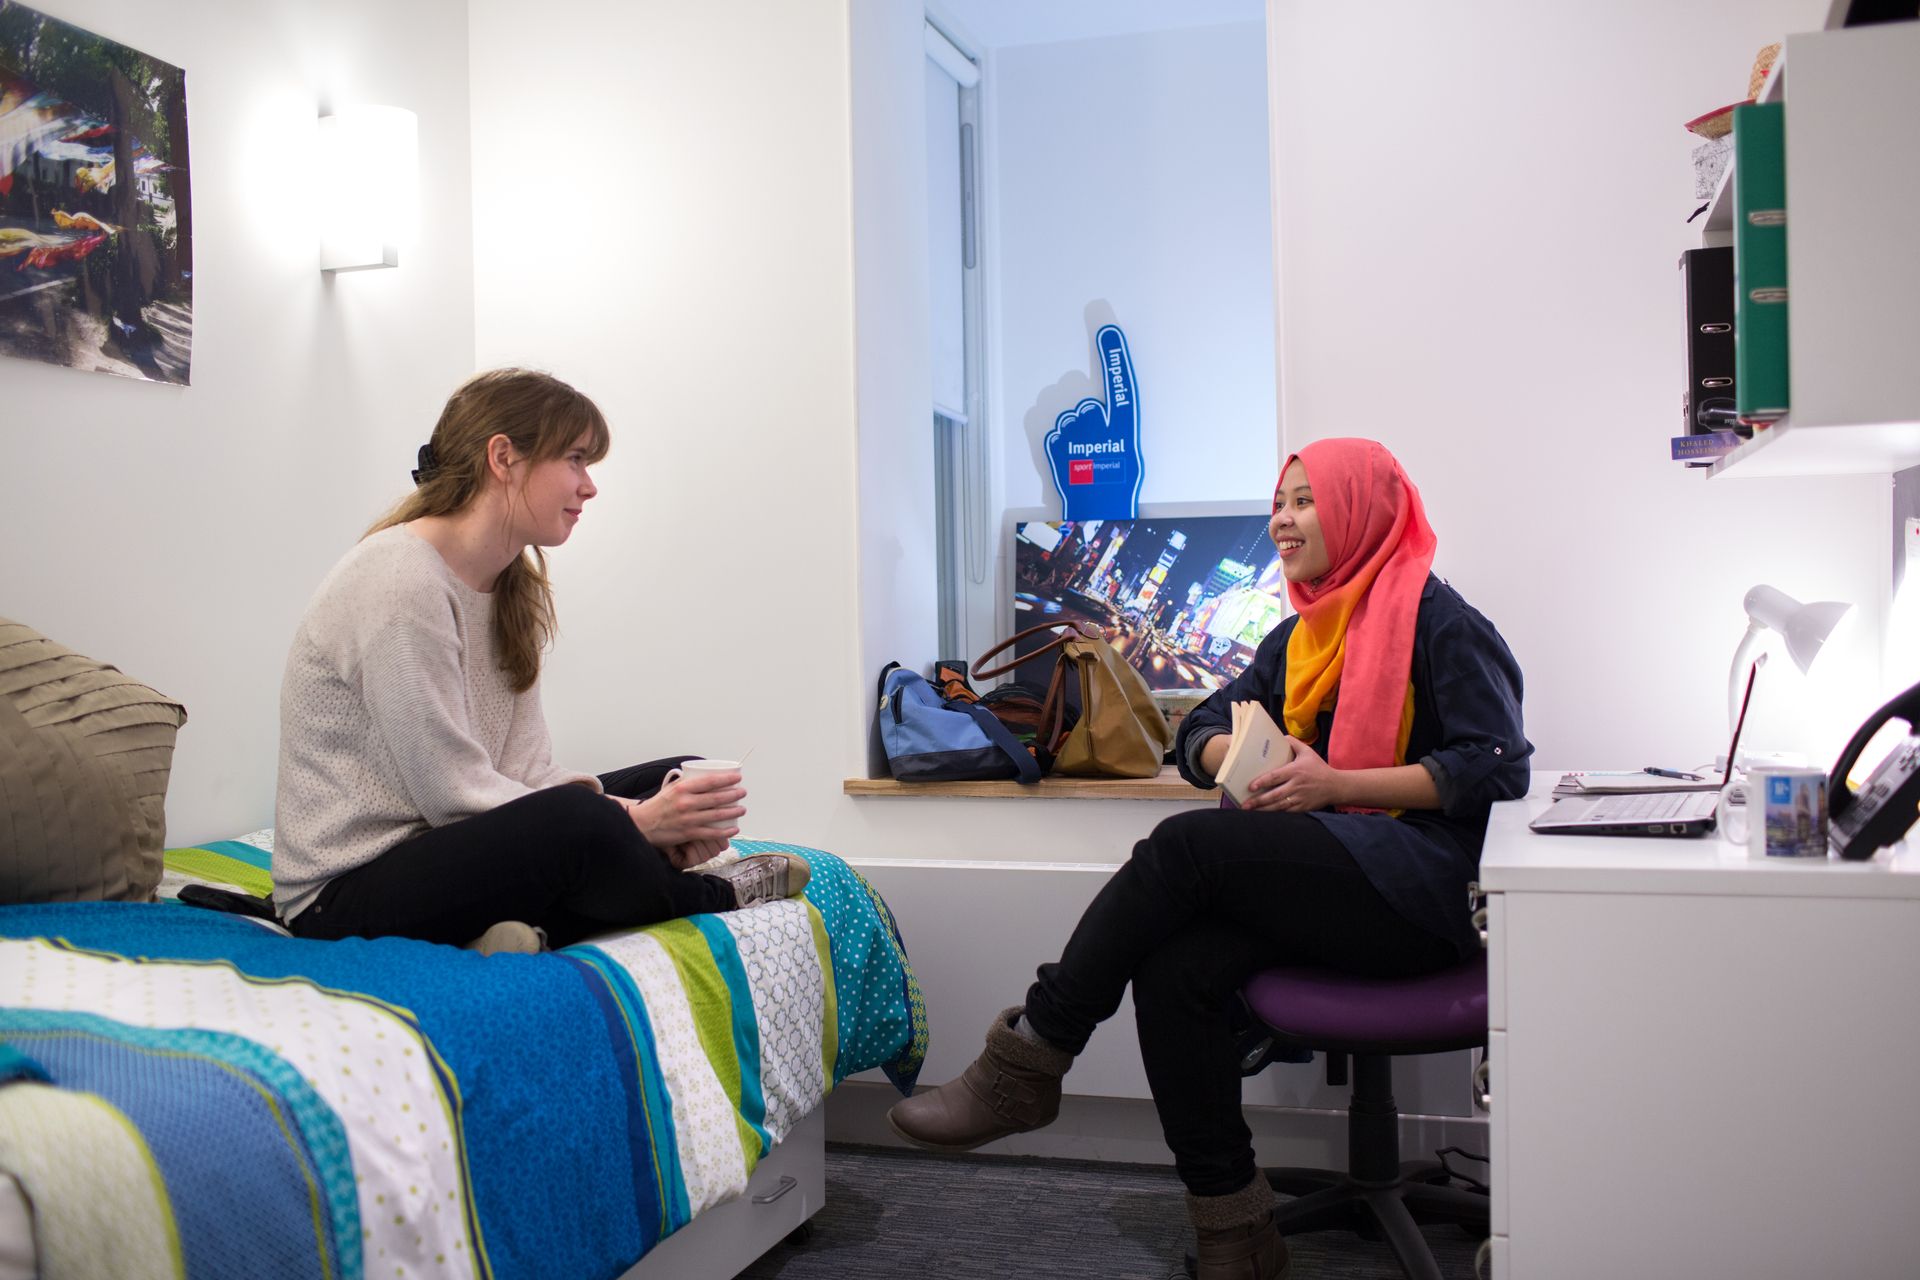 Students chatting in a student bedroom